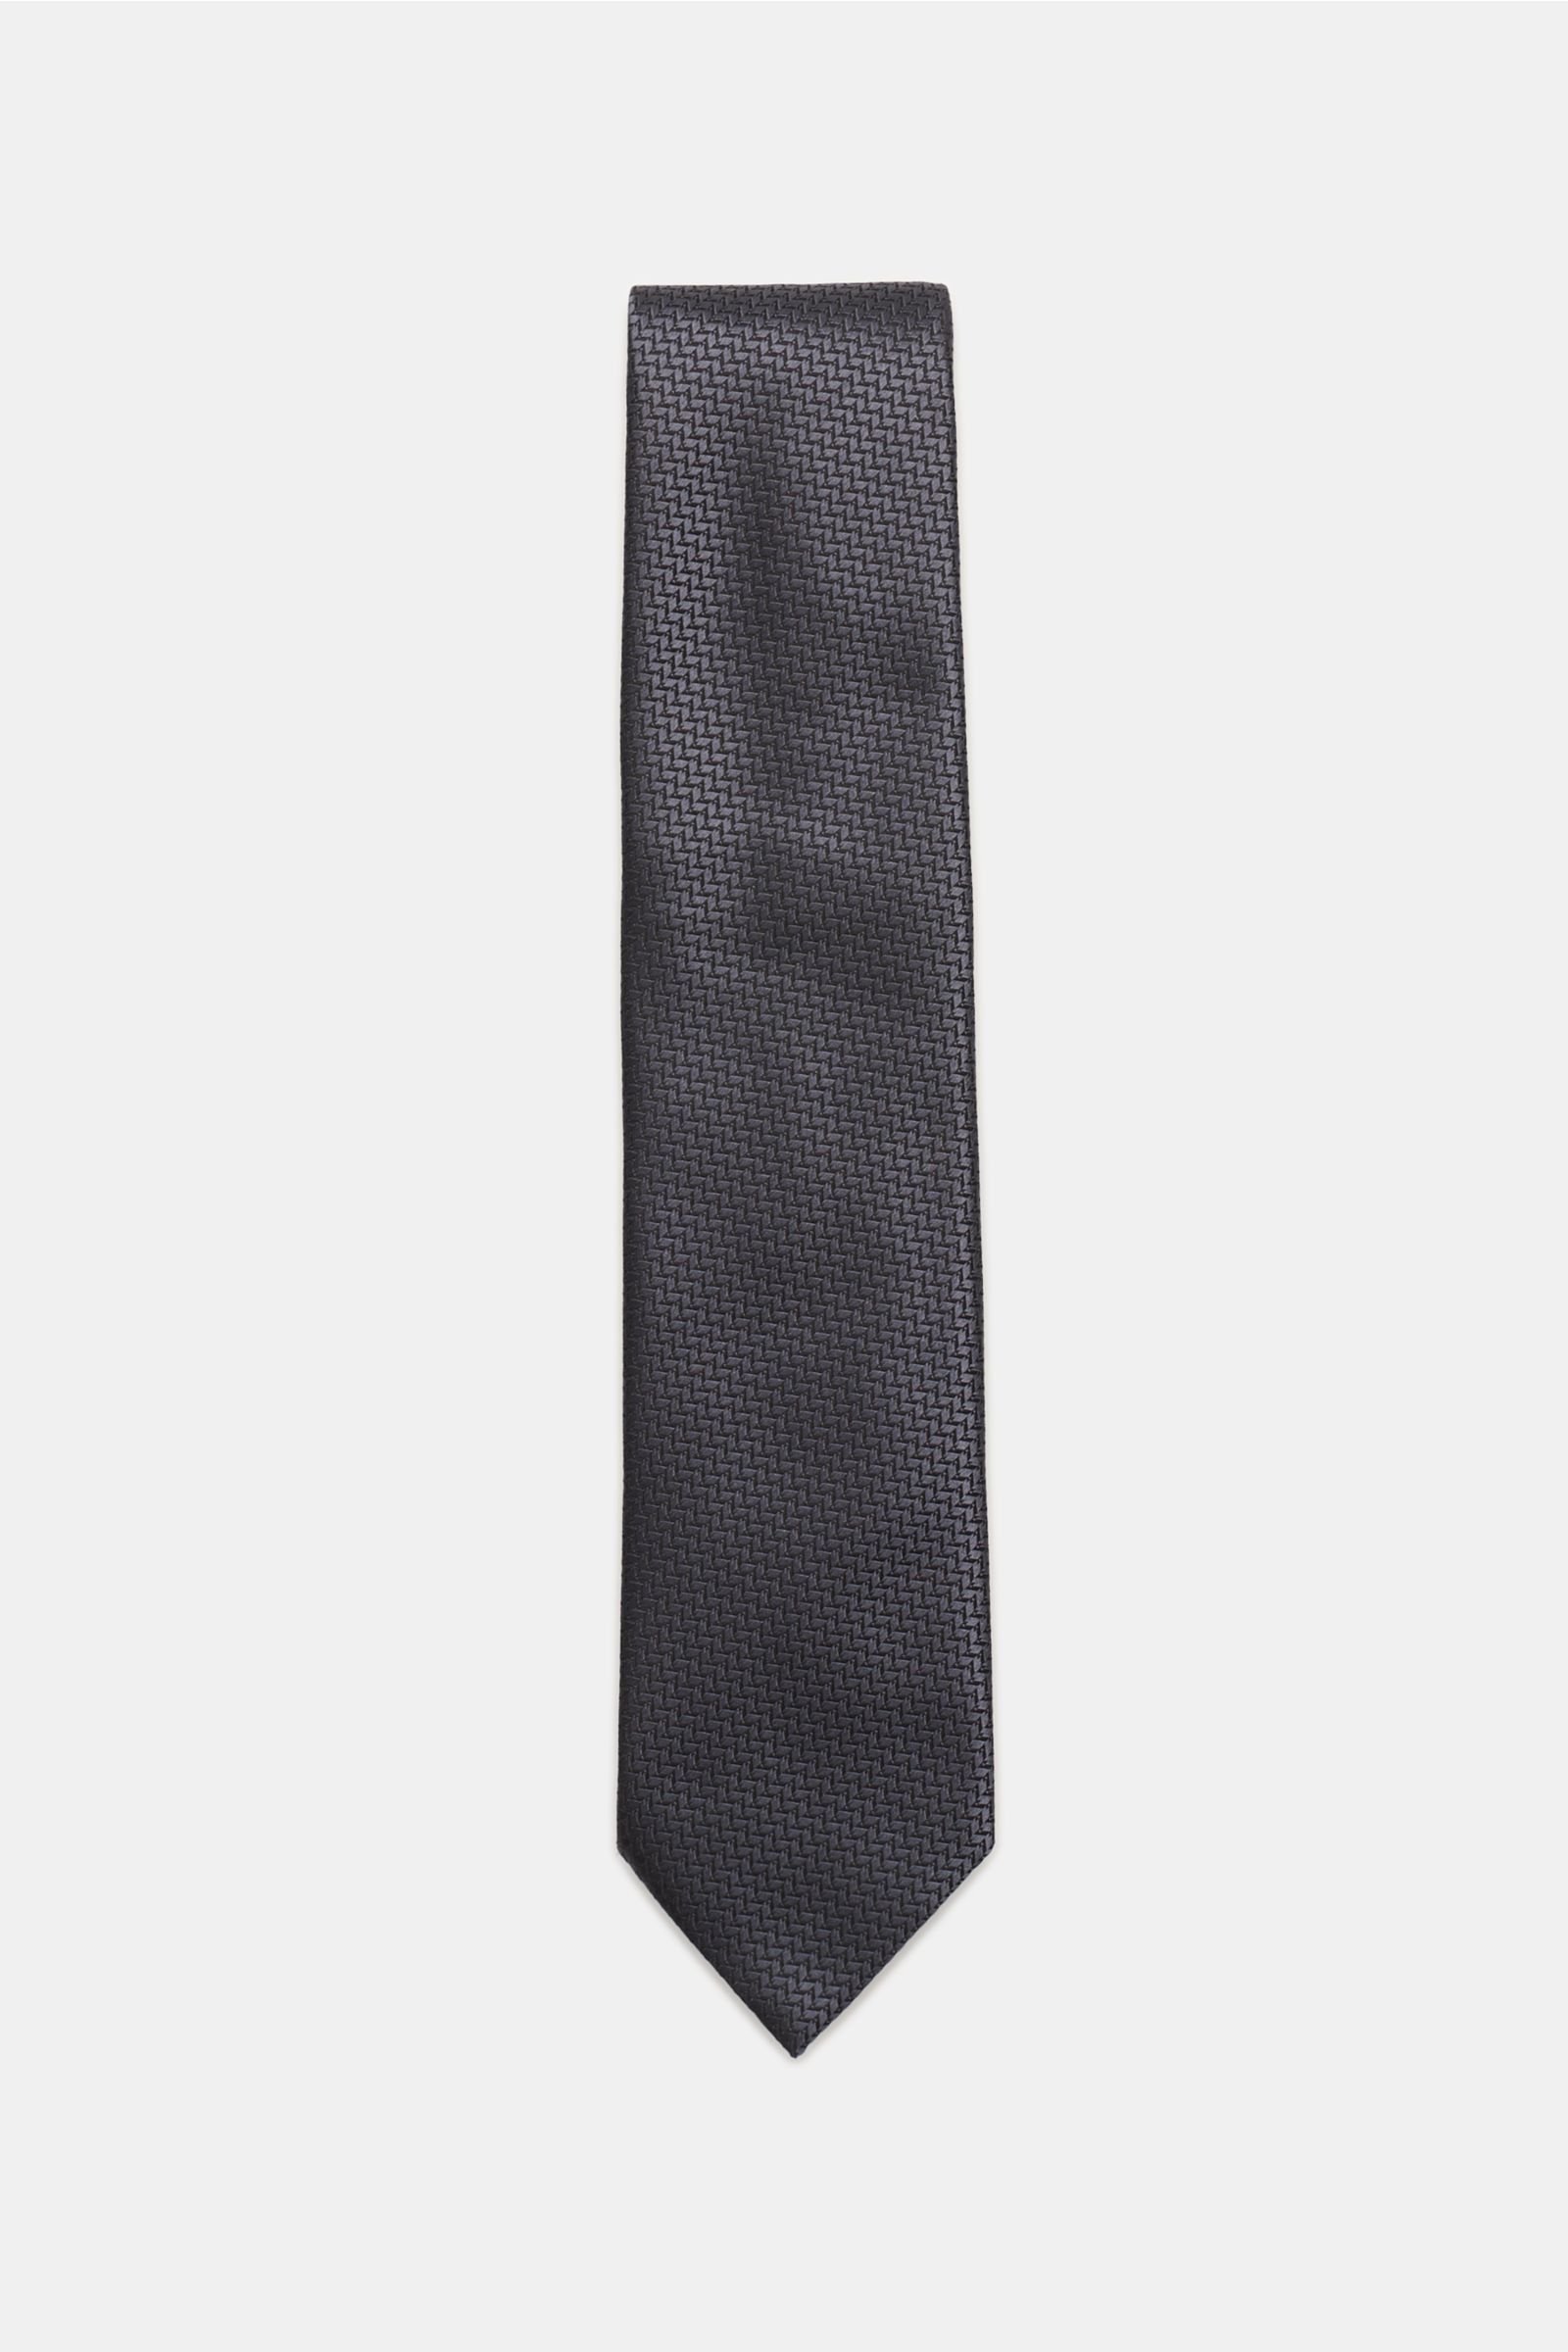 Silk tie anthracite patterned